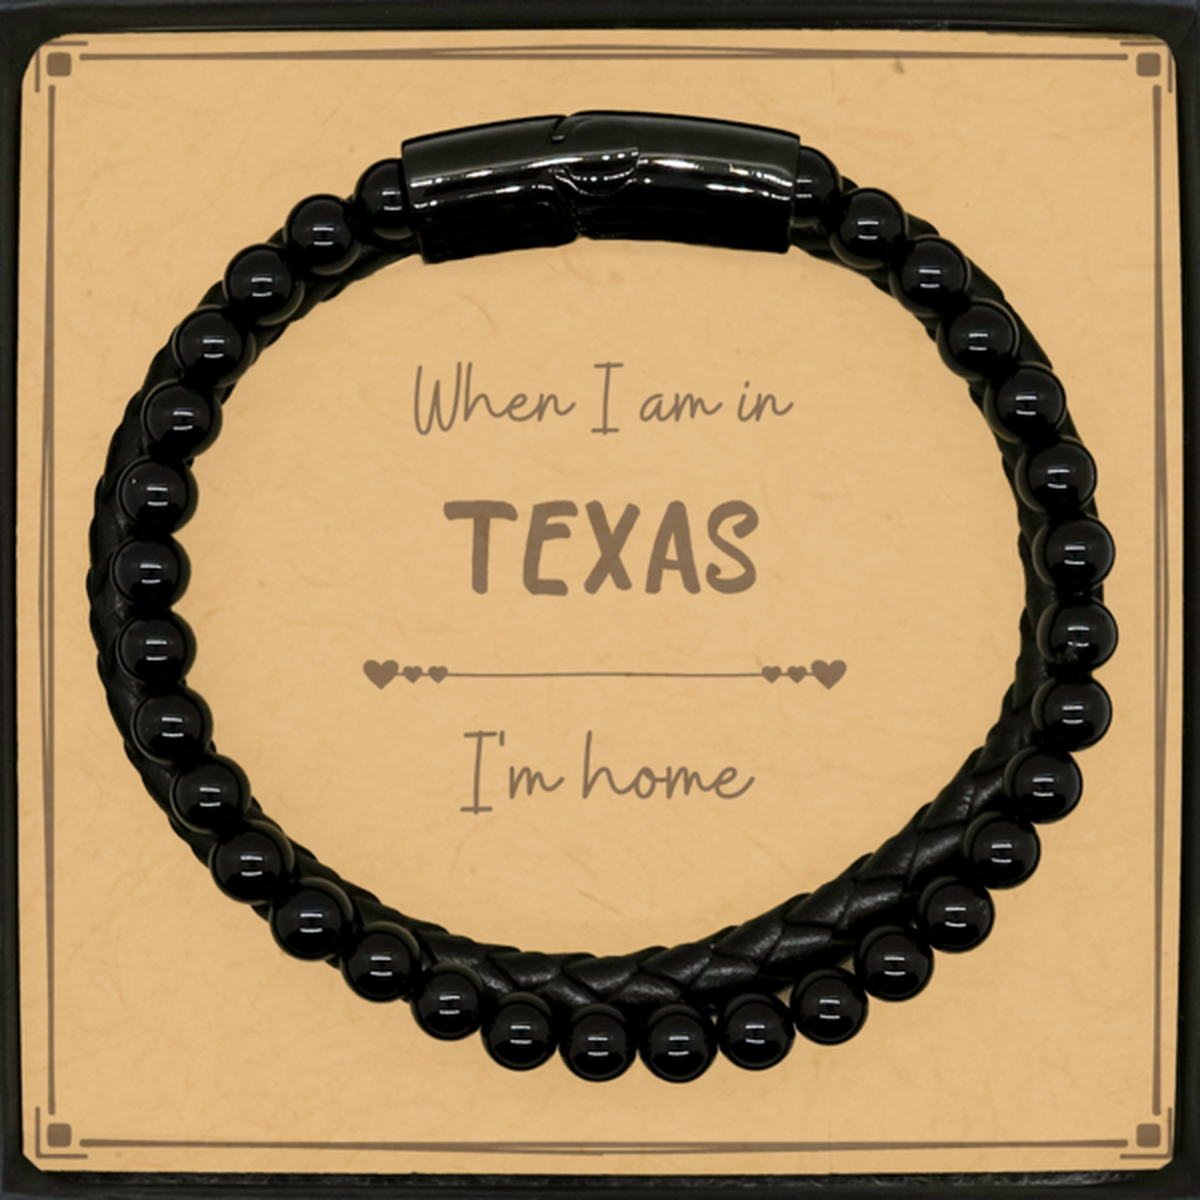 When I am in Texas I'm home Stone Leather Bracelets, Message Card Gifts For Texas, State Texas Birthday Gifts for Friends Coworker